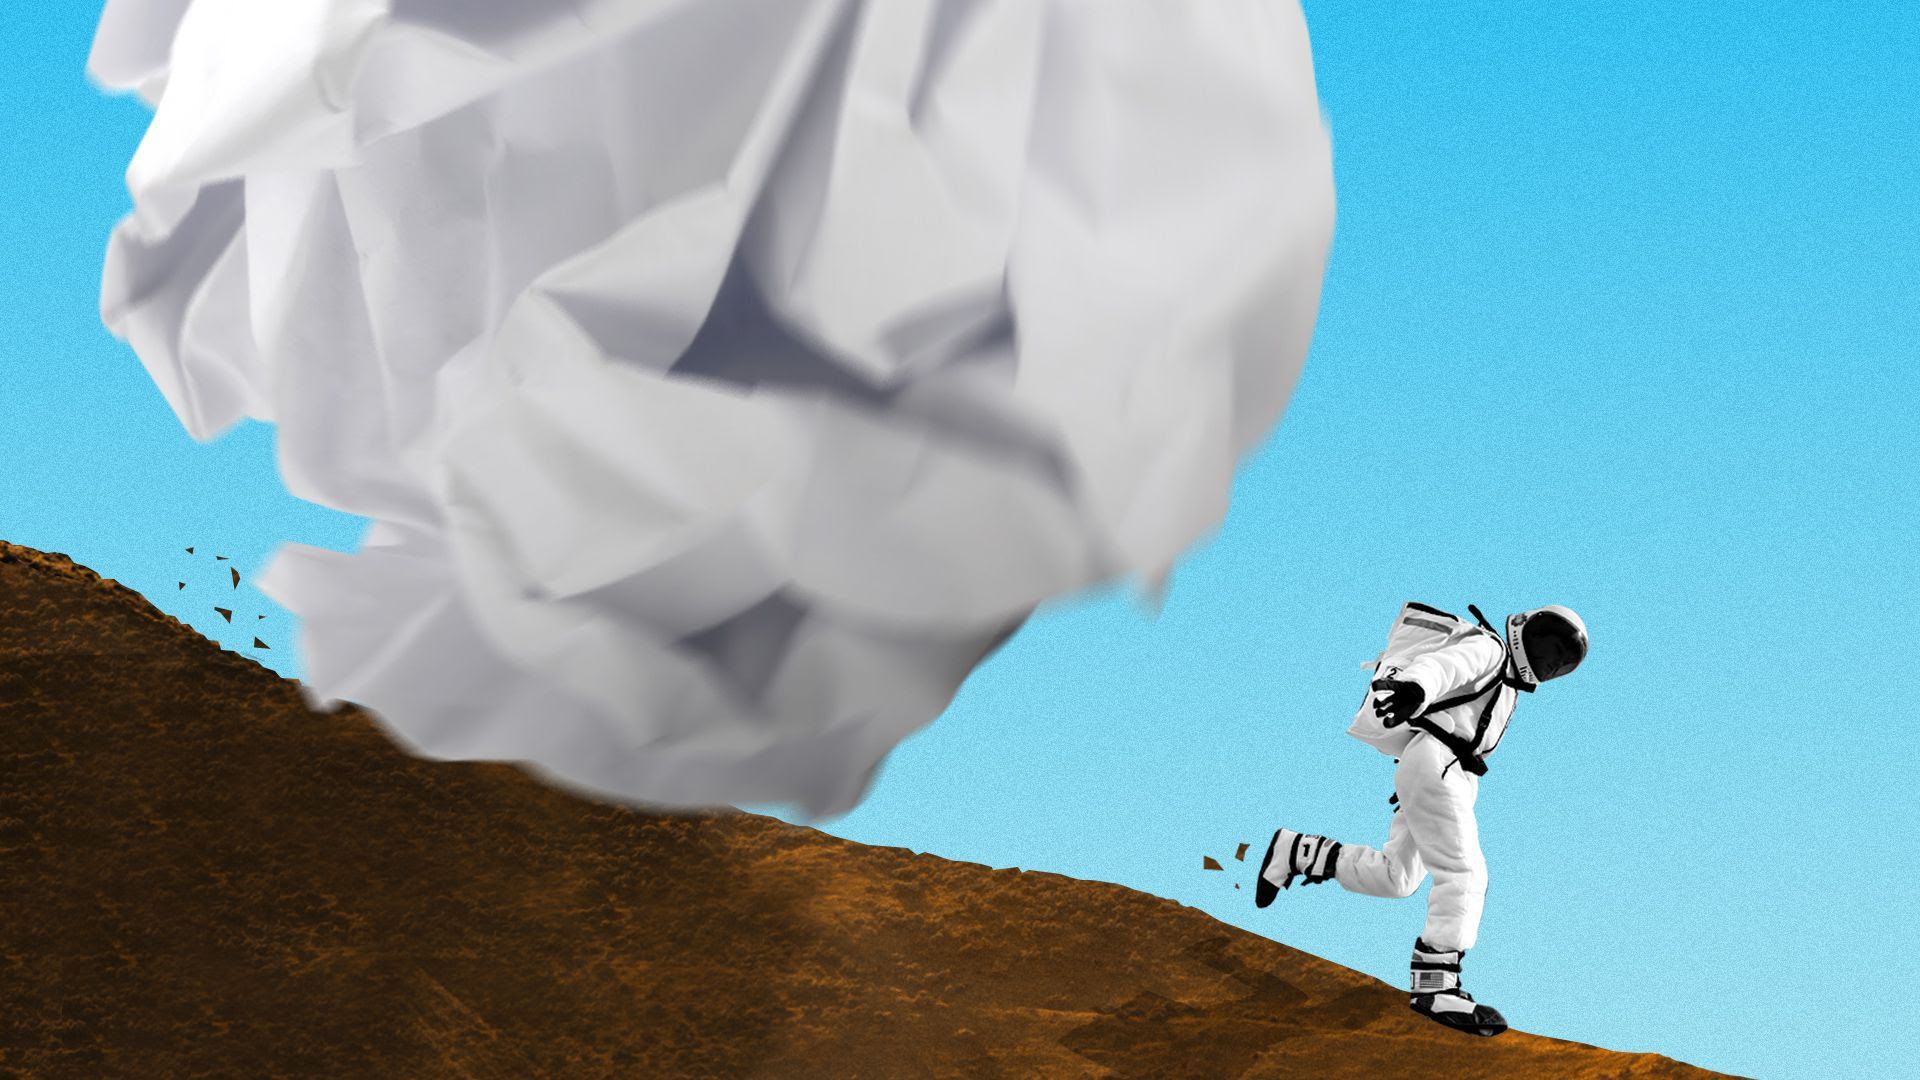 Illustration of an astronaut running away from a big paper ball on a hill